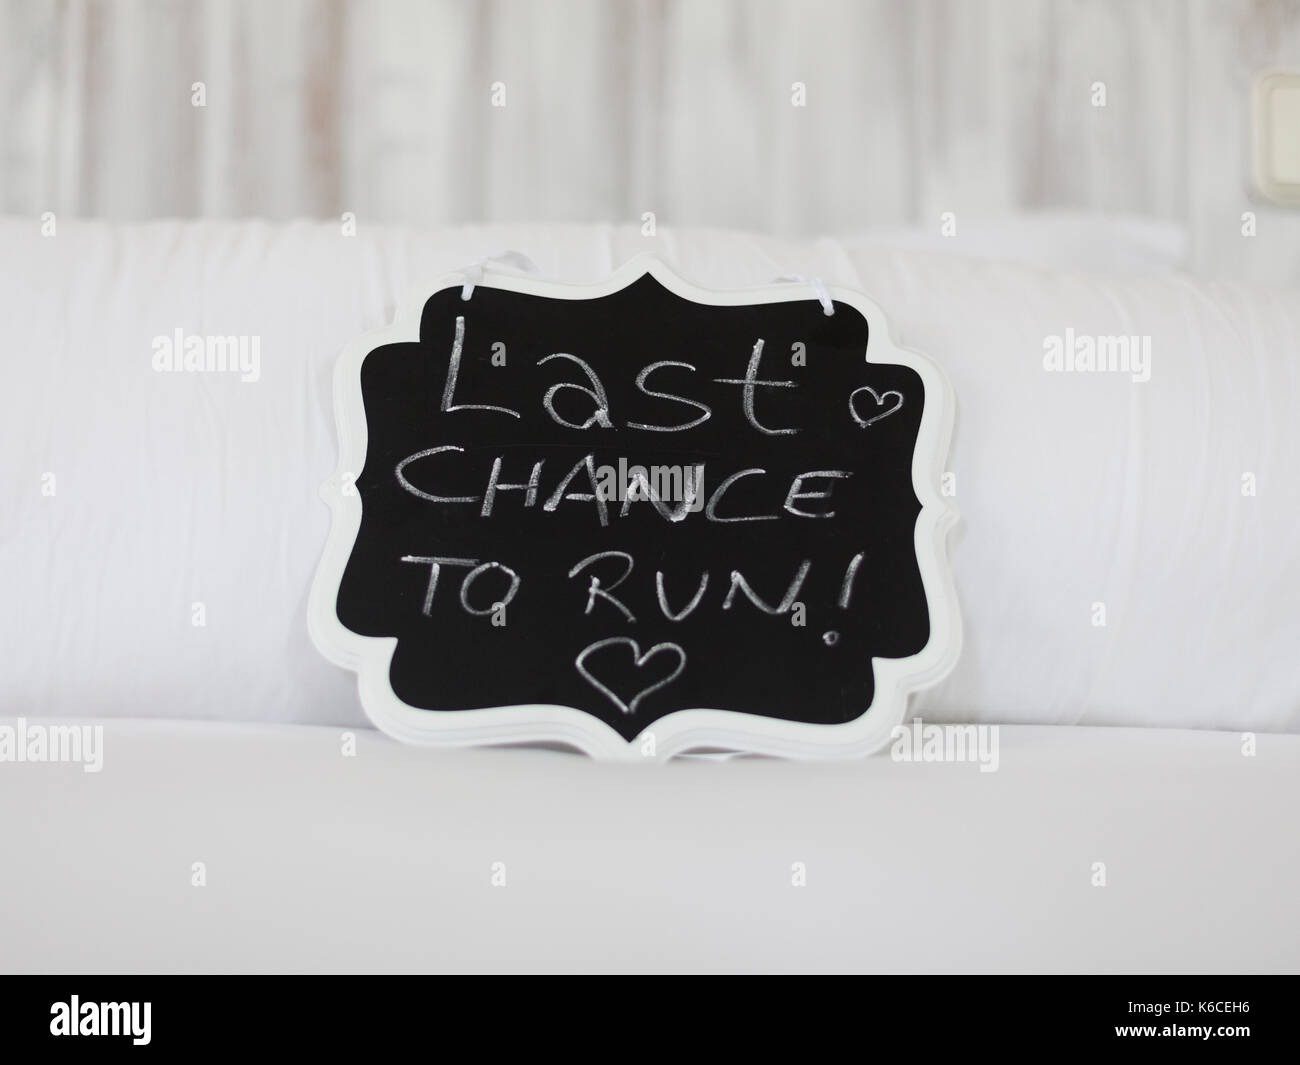 Blackboard with funny phrase for wedding 'last chance to run' Stock Photo